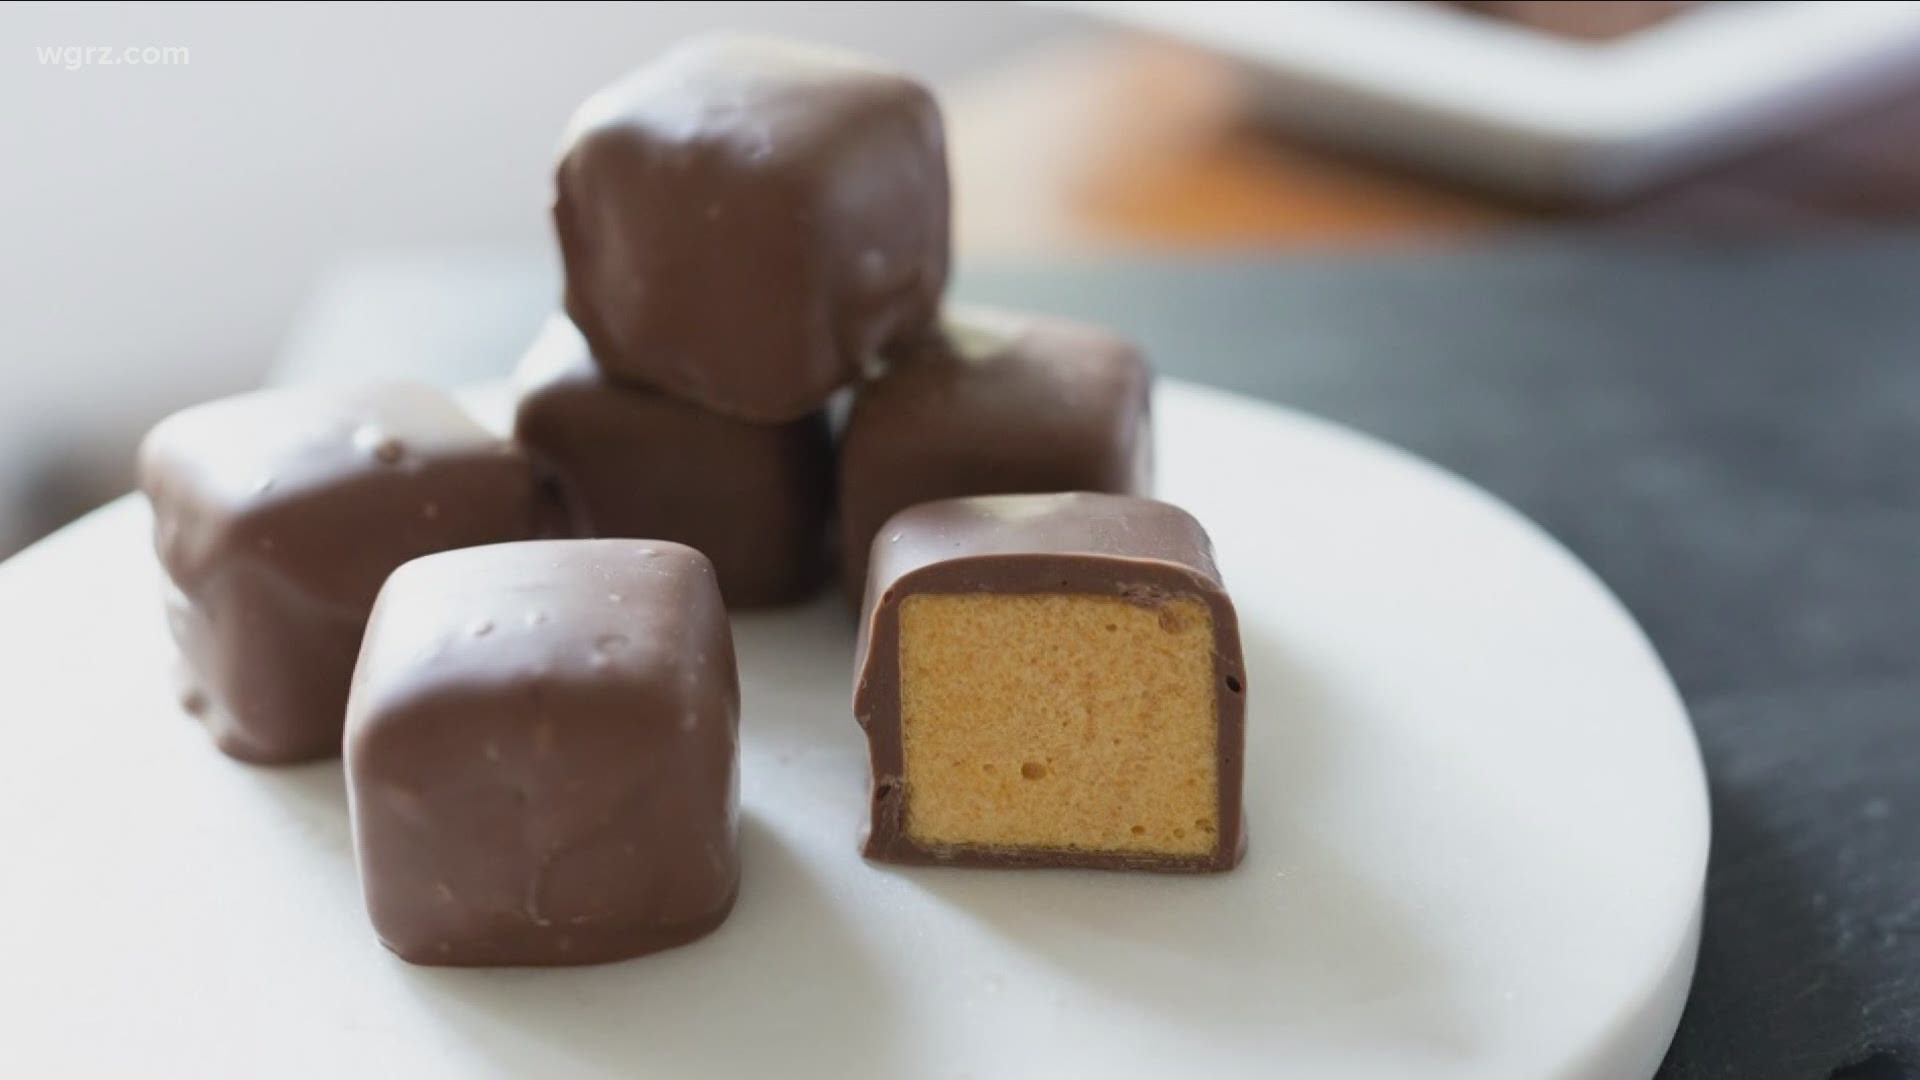 September 21 is National Sponge Candy Day